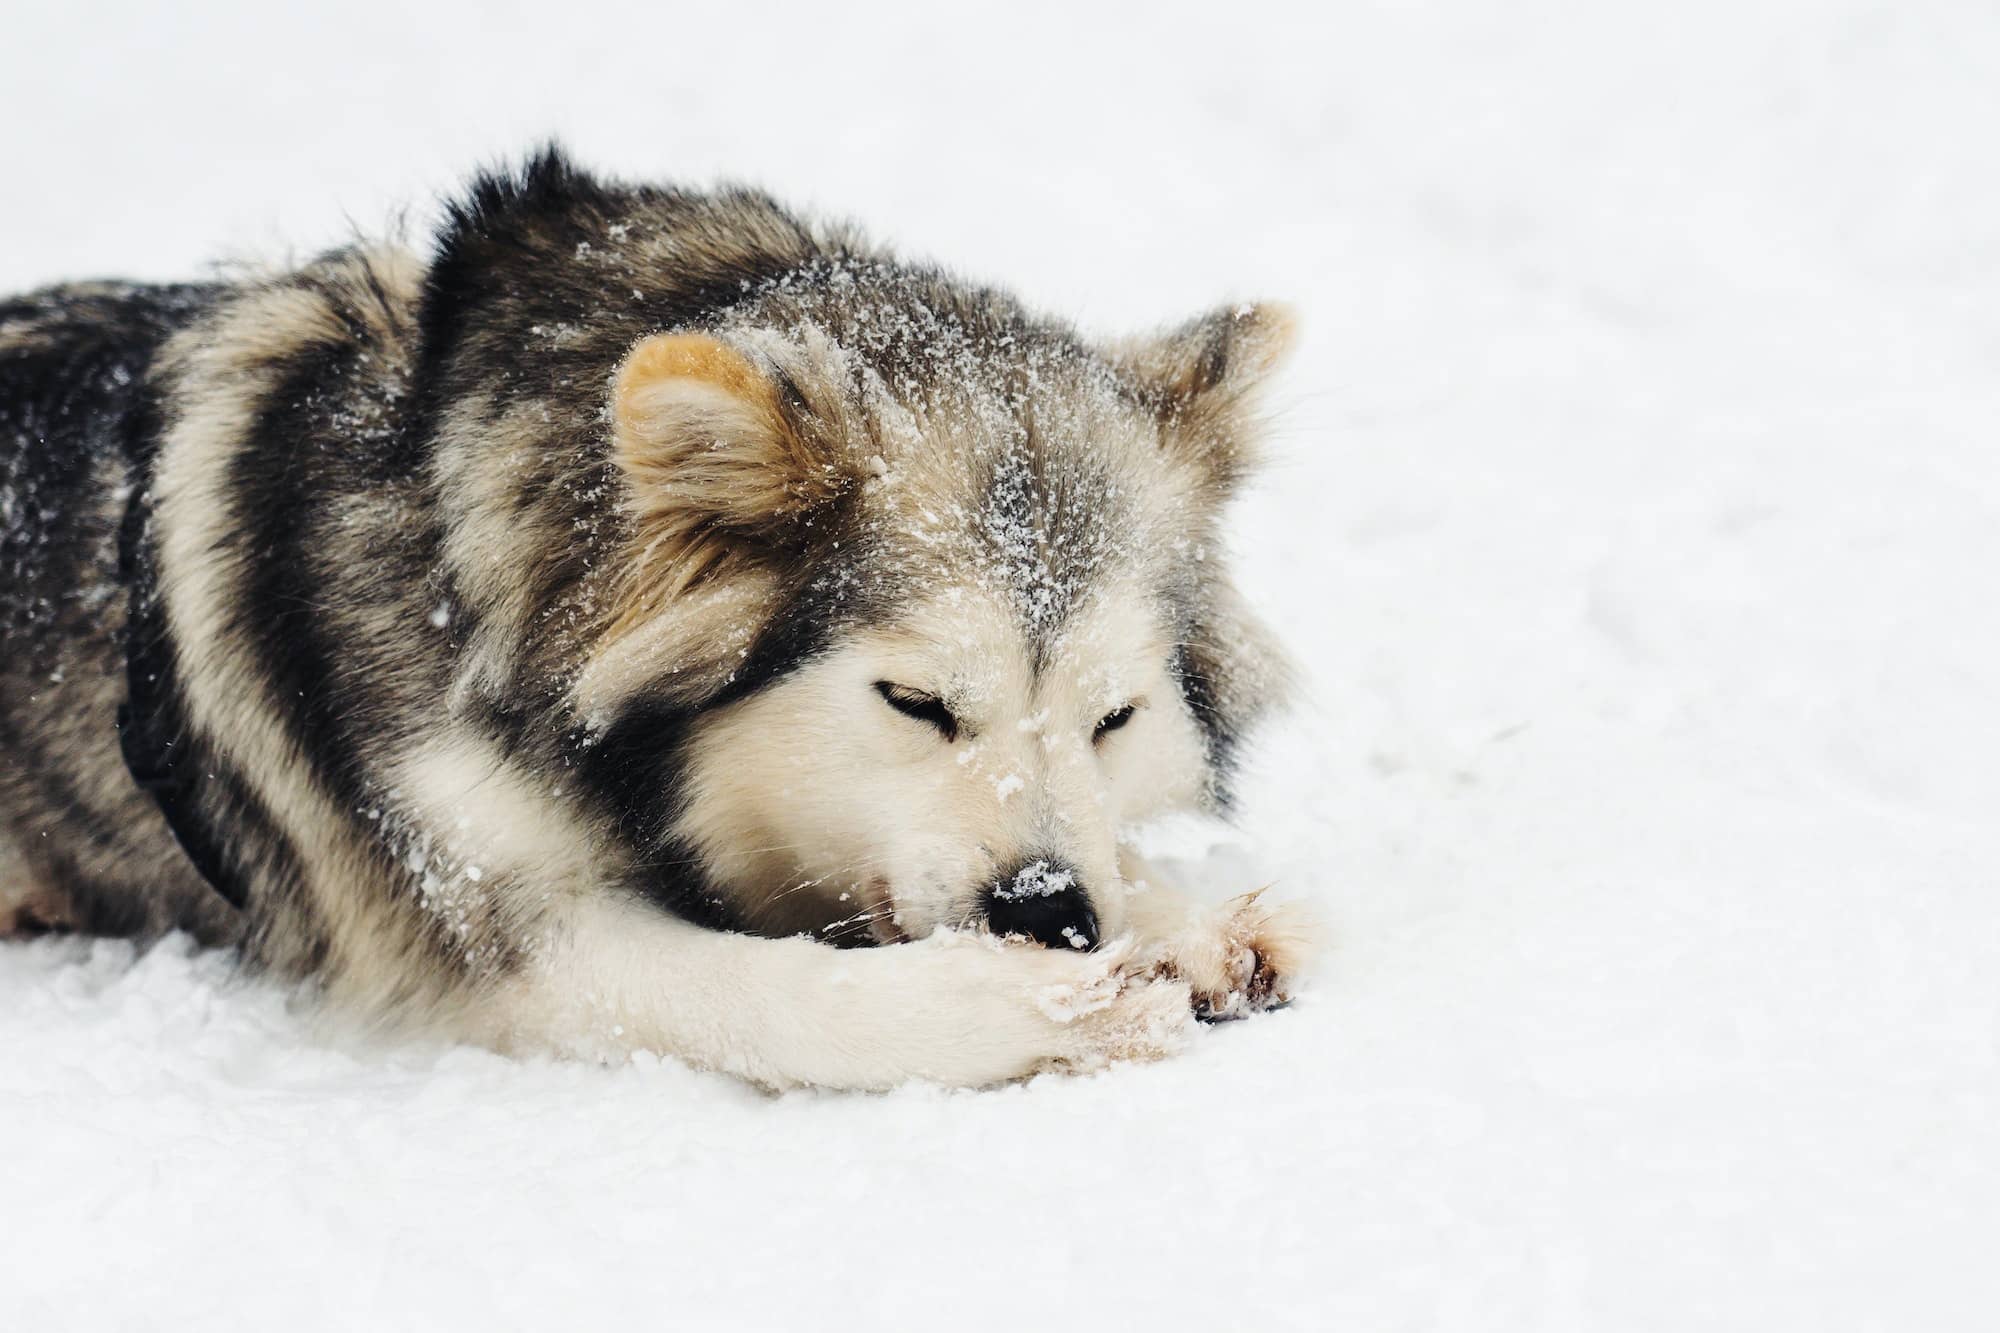 Dog playing with snow